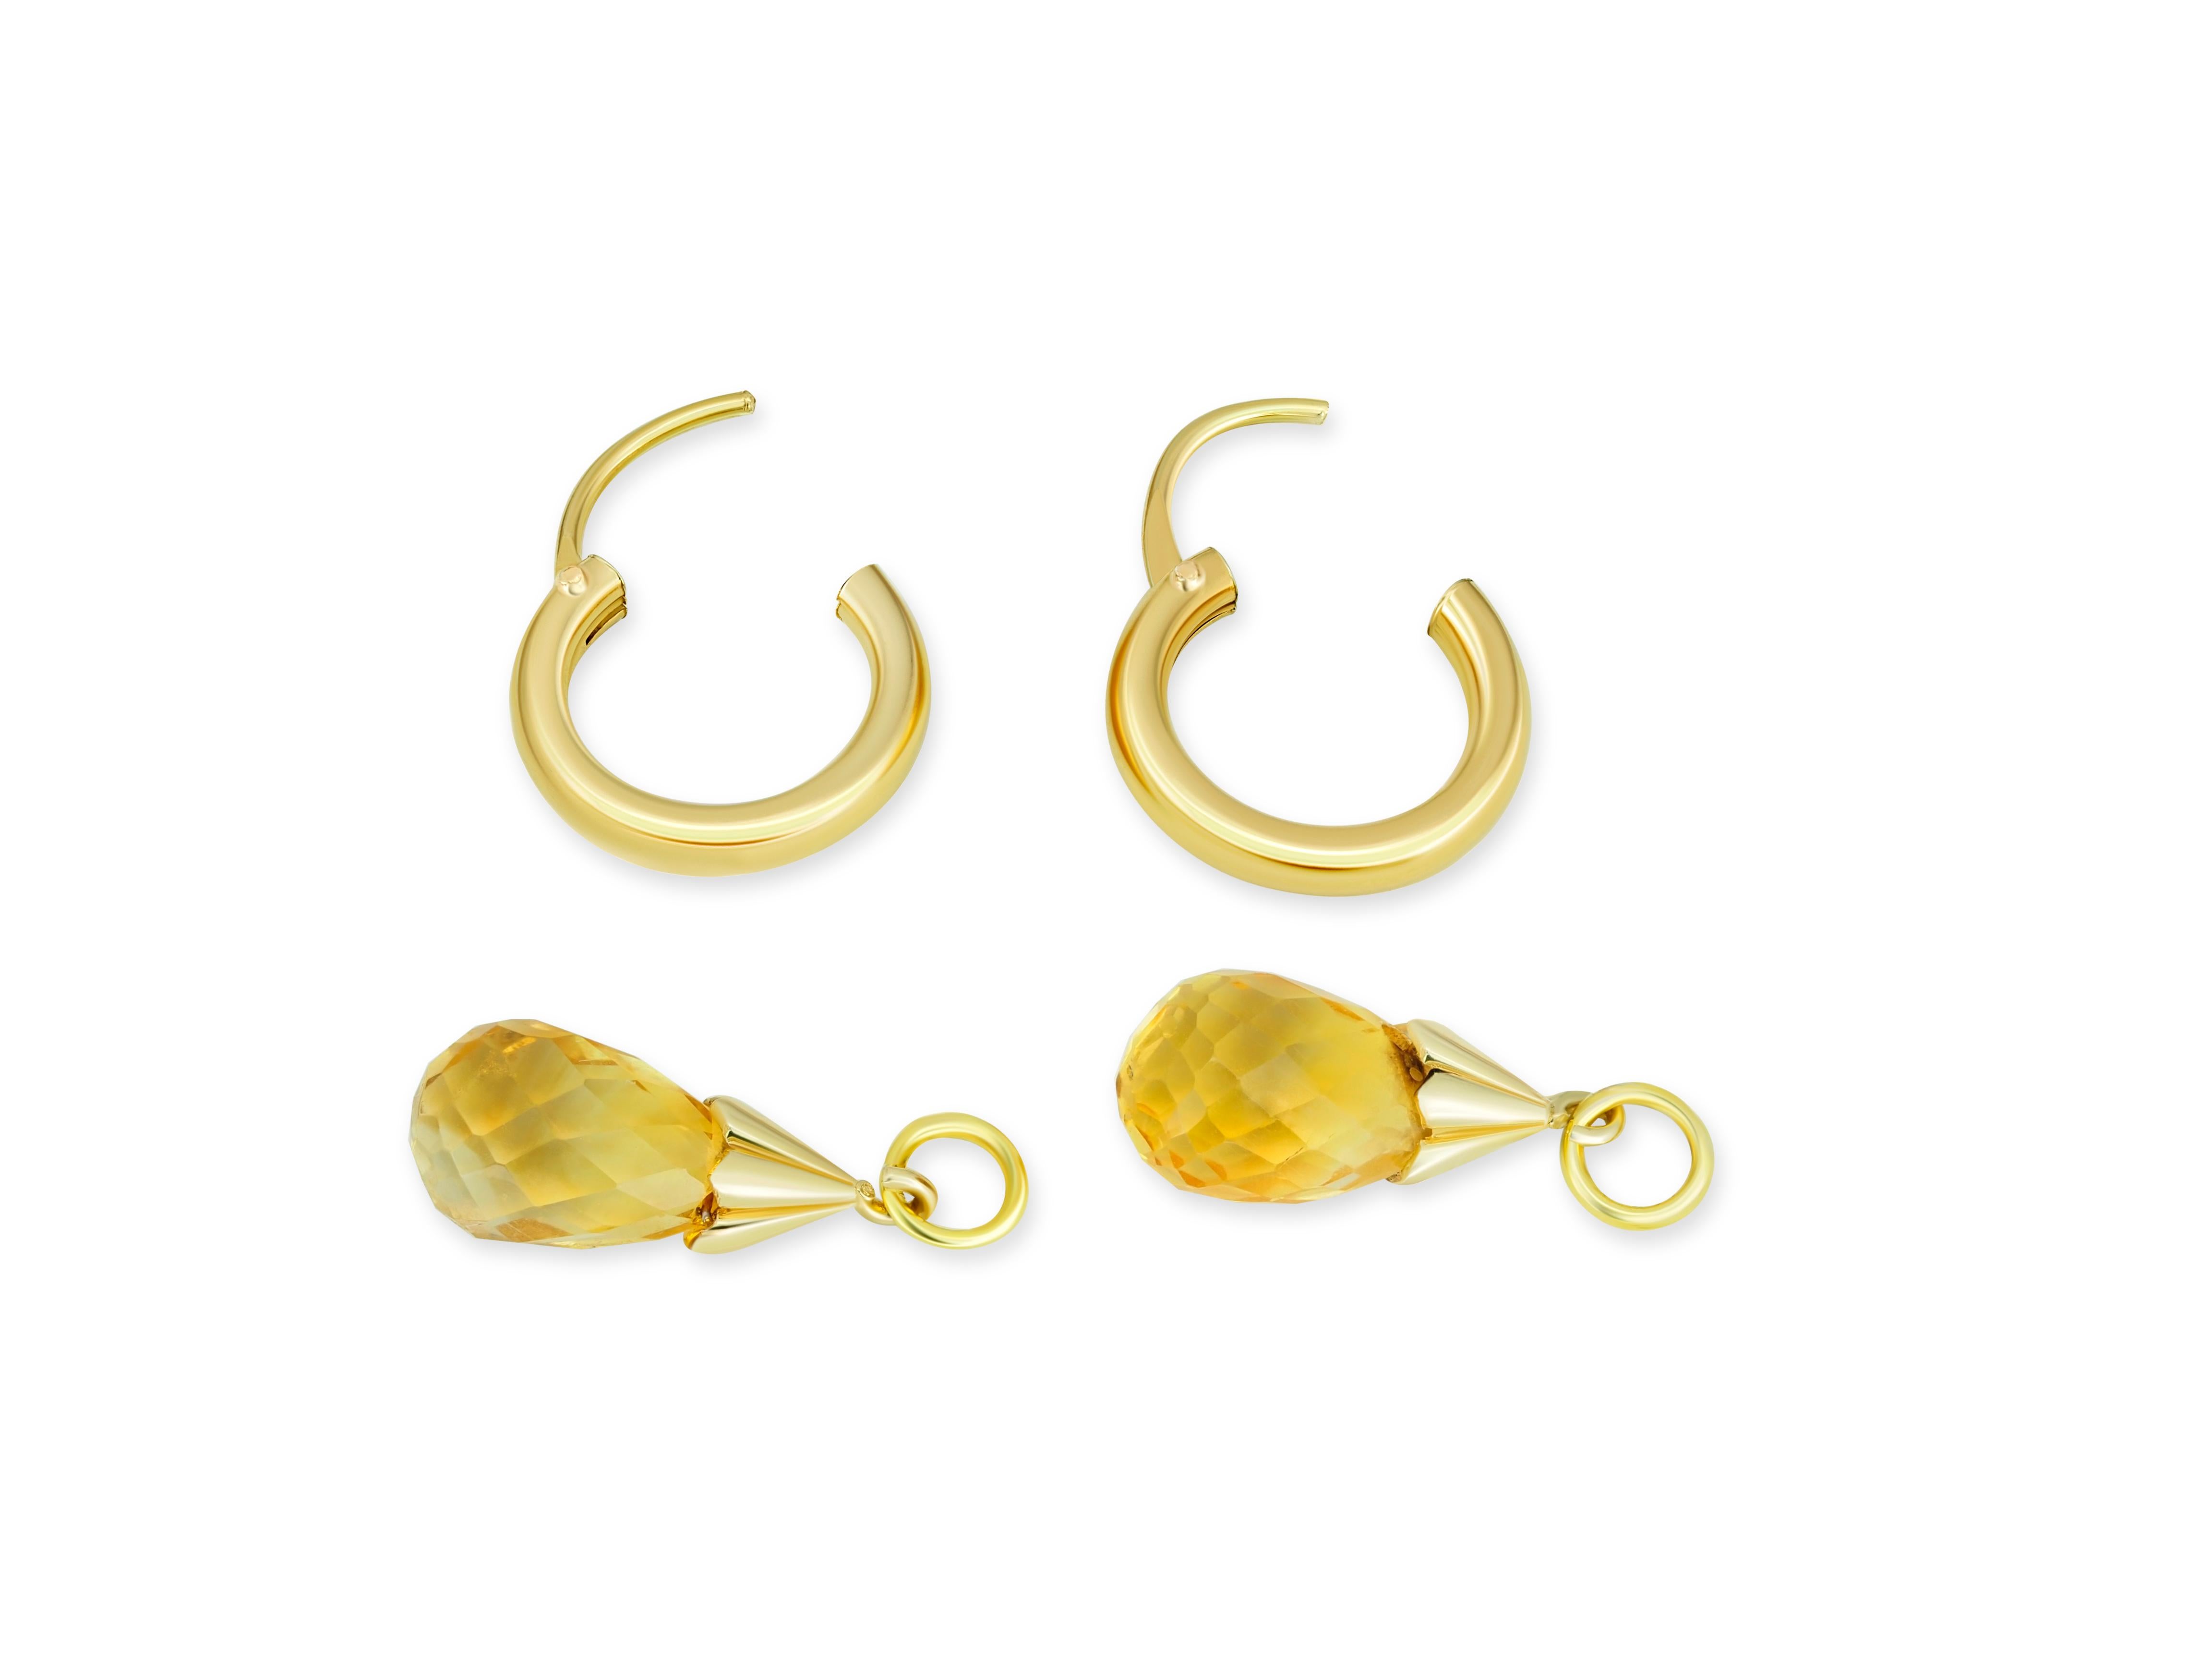 Modern Hoop Earrings and Citrine Briolette Charms in 14k Gold For Sale